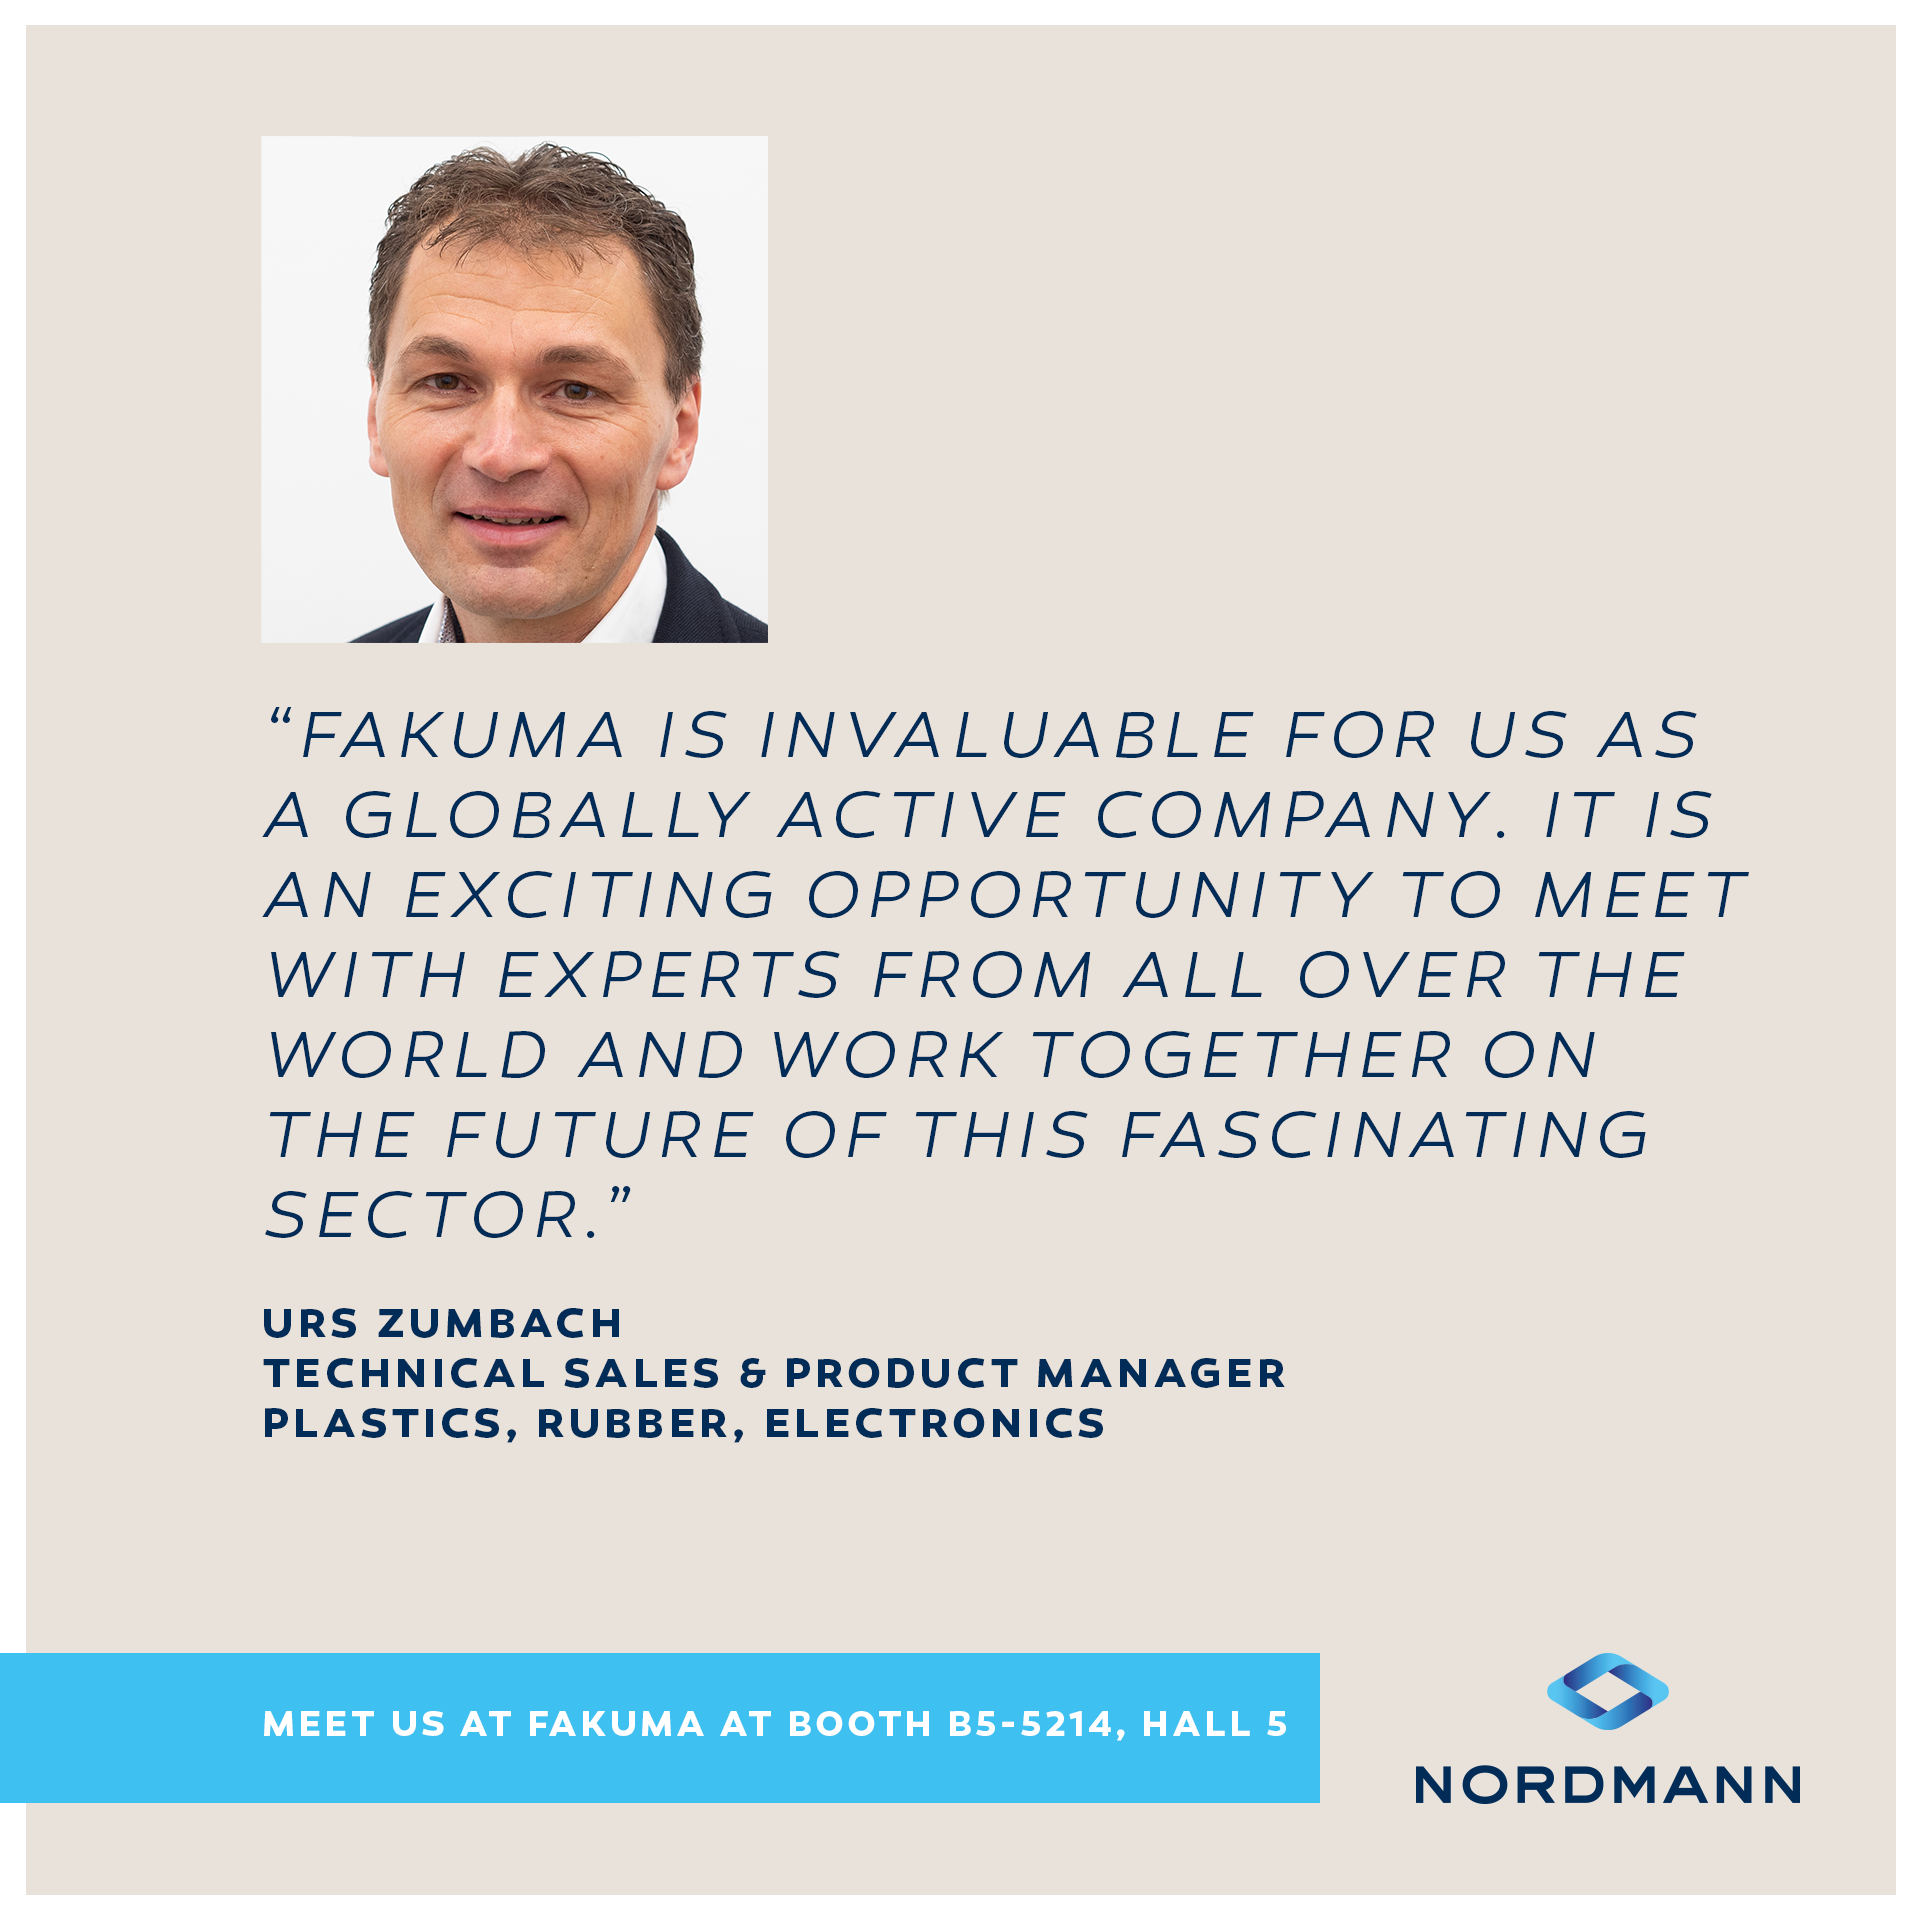 Quote by Urs Zumbach Technical Sales & Product Manager Plastics, Rubber, Electronics Nordmann Switzerland AG